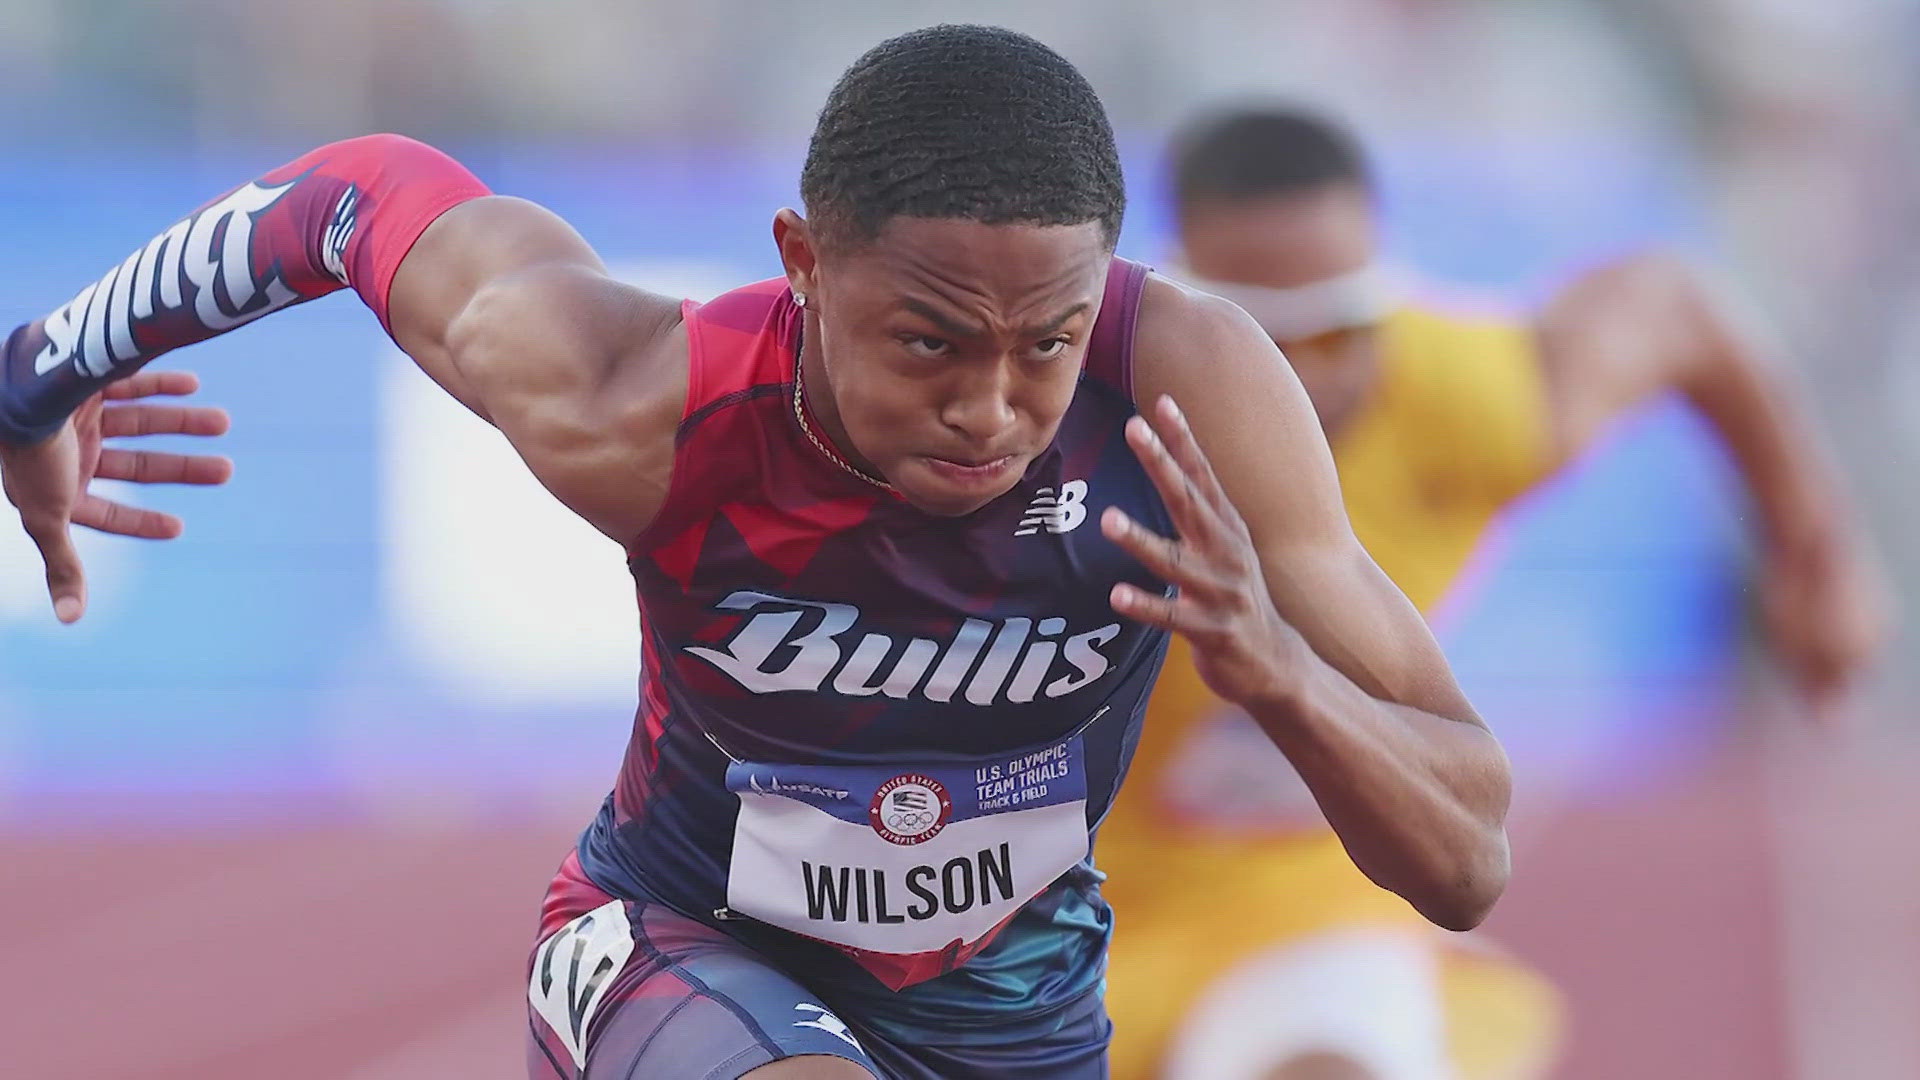 He's now the youngest U.S. male track and field athlete to make the Olympic team.